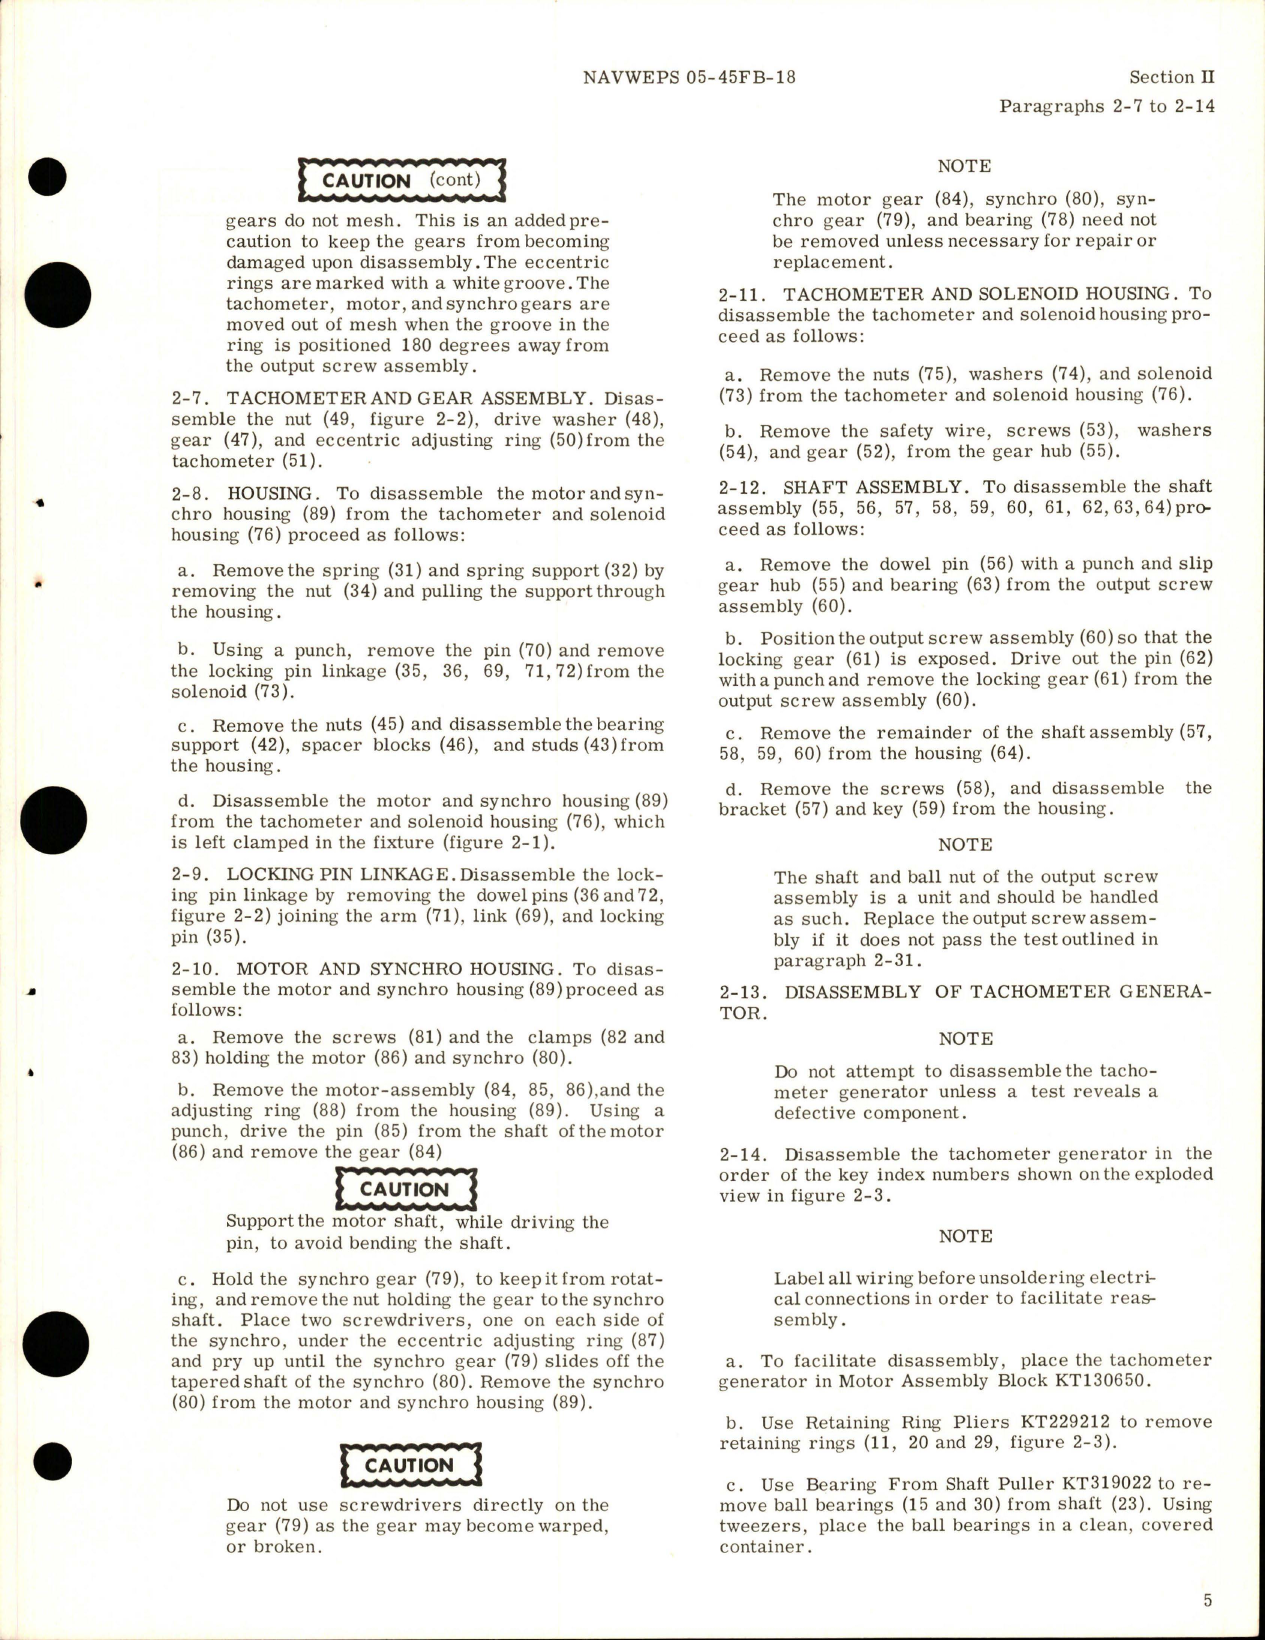 Sample page 9 from AirCorps Library document: Overhaul Instructions for Servo - Part 142D596G5 and 142D596G6 for G-3H Auto Pilot Model 2CJ4D1